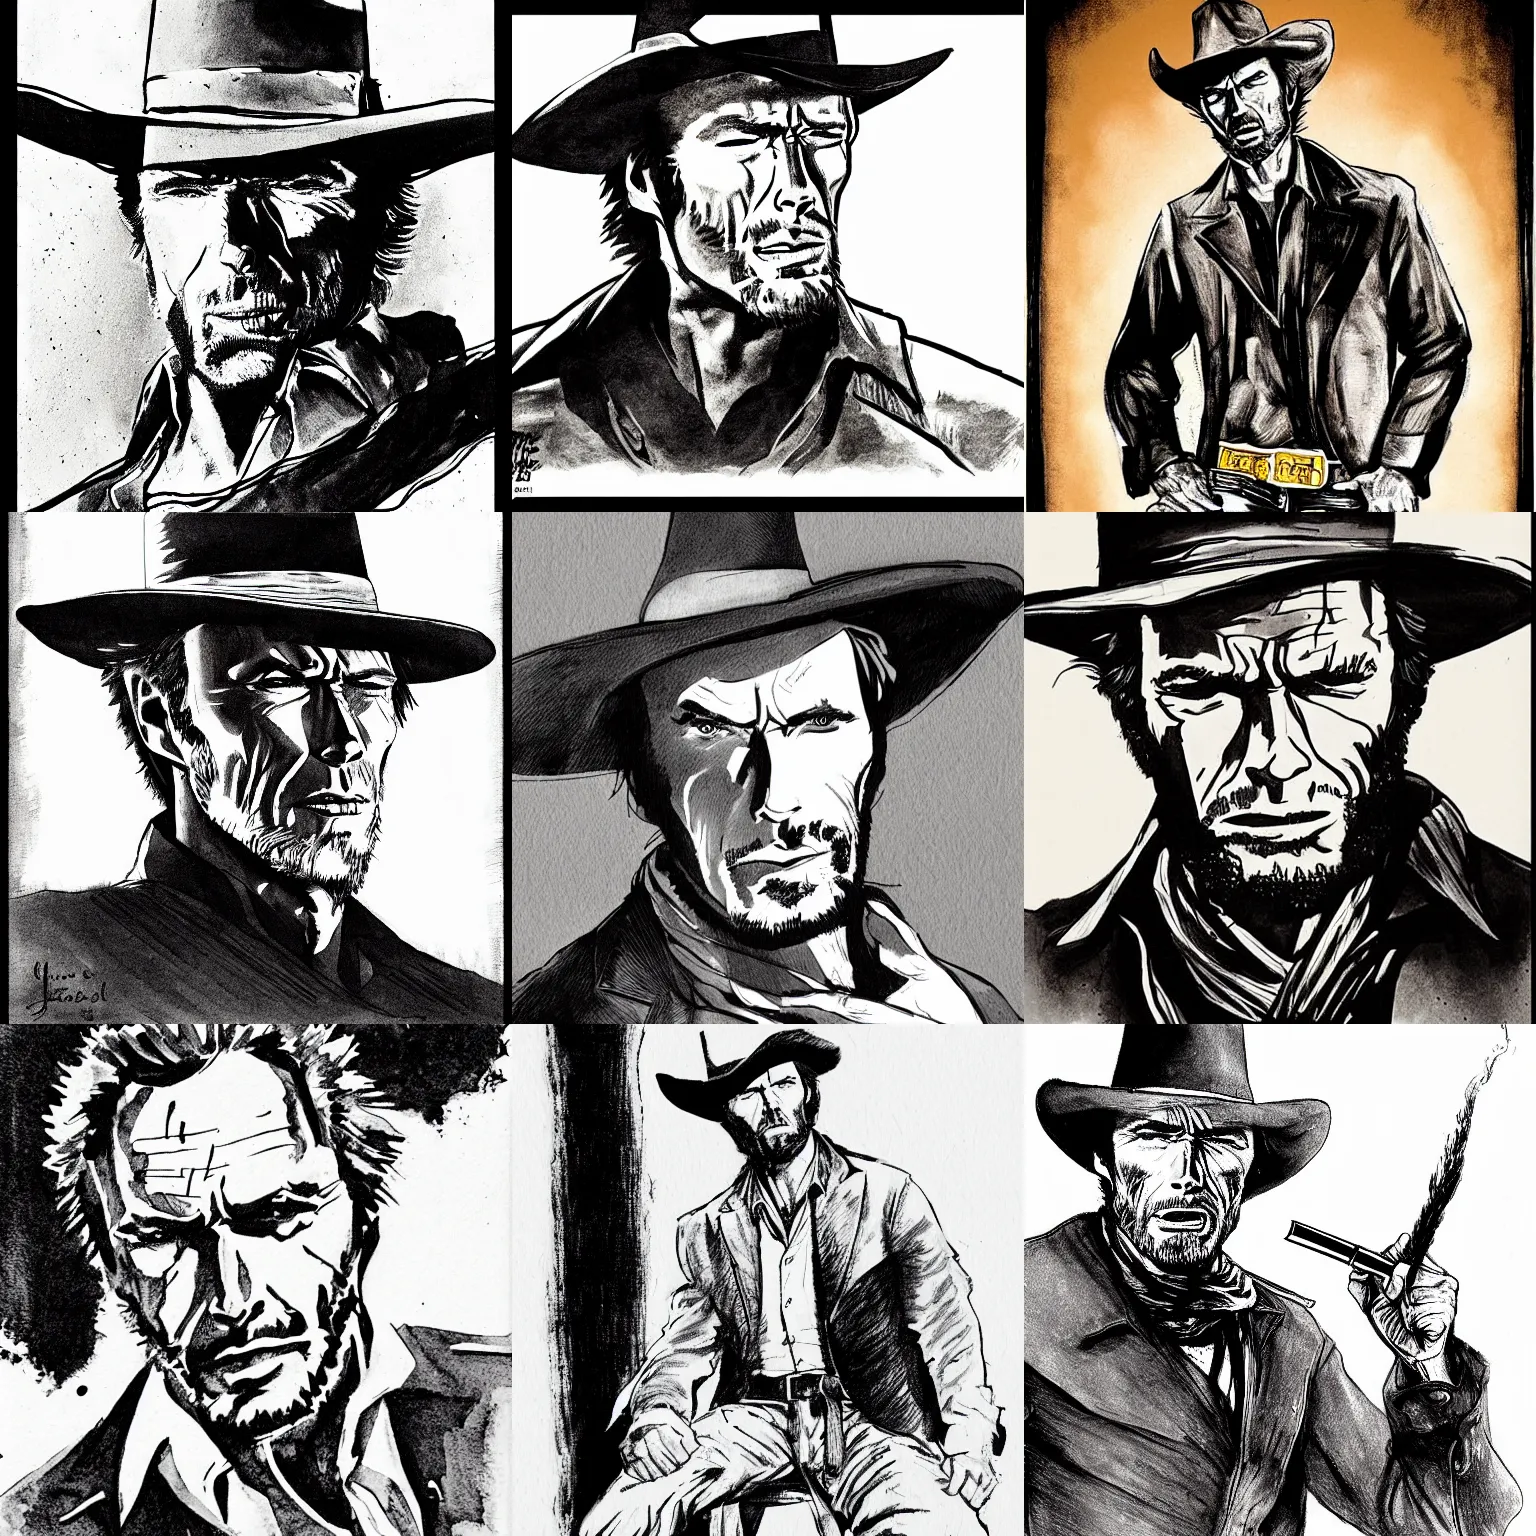 Prompt: Clint Eastwood. A Fistful Of Dollars. Short Cigar burning. Western. Classic Pose. Portrait. Pen and Ink. Monochrome